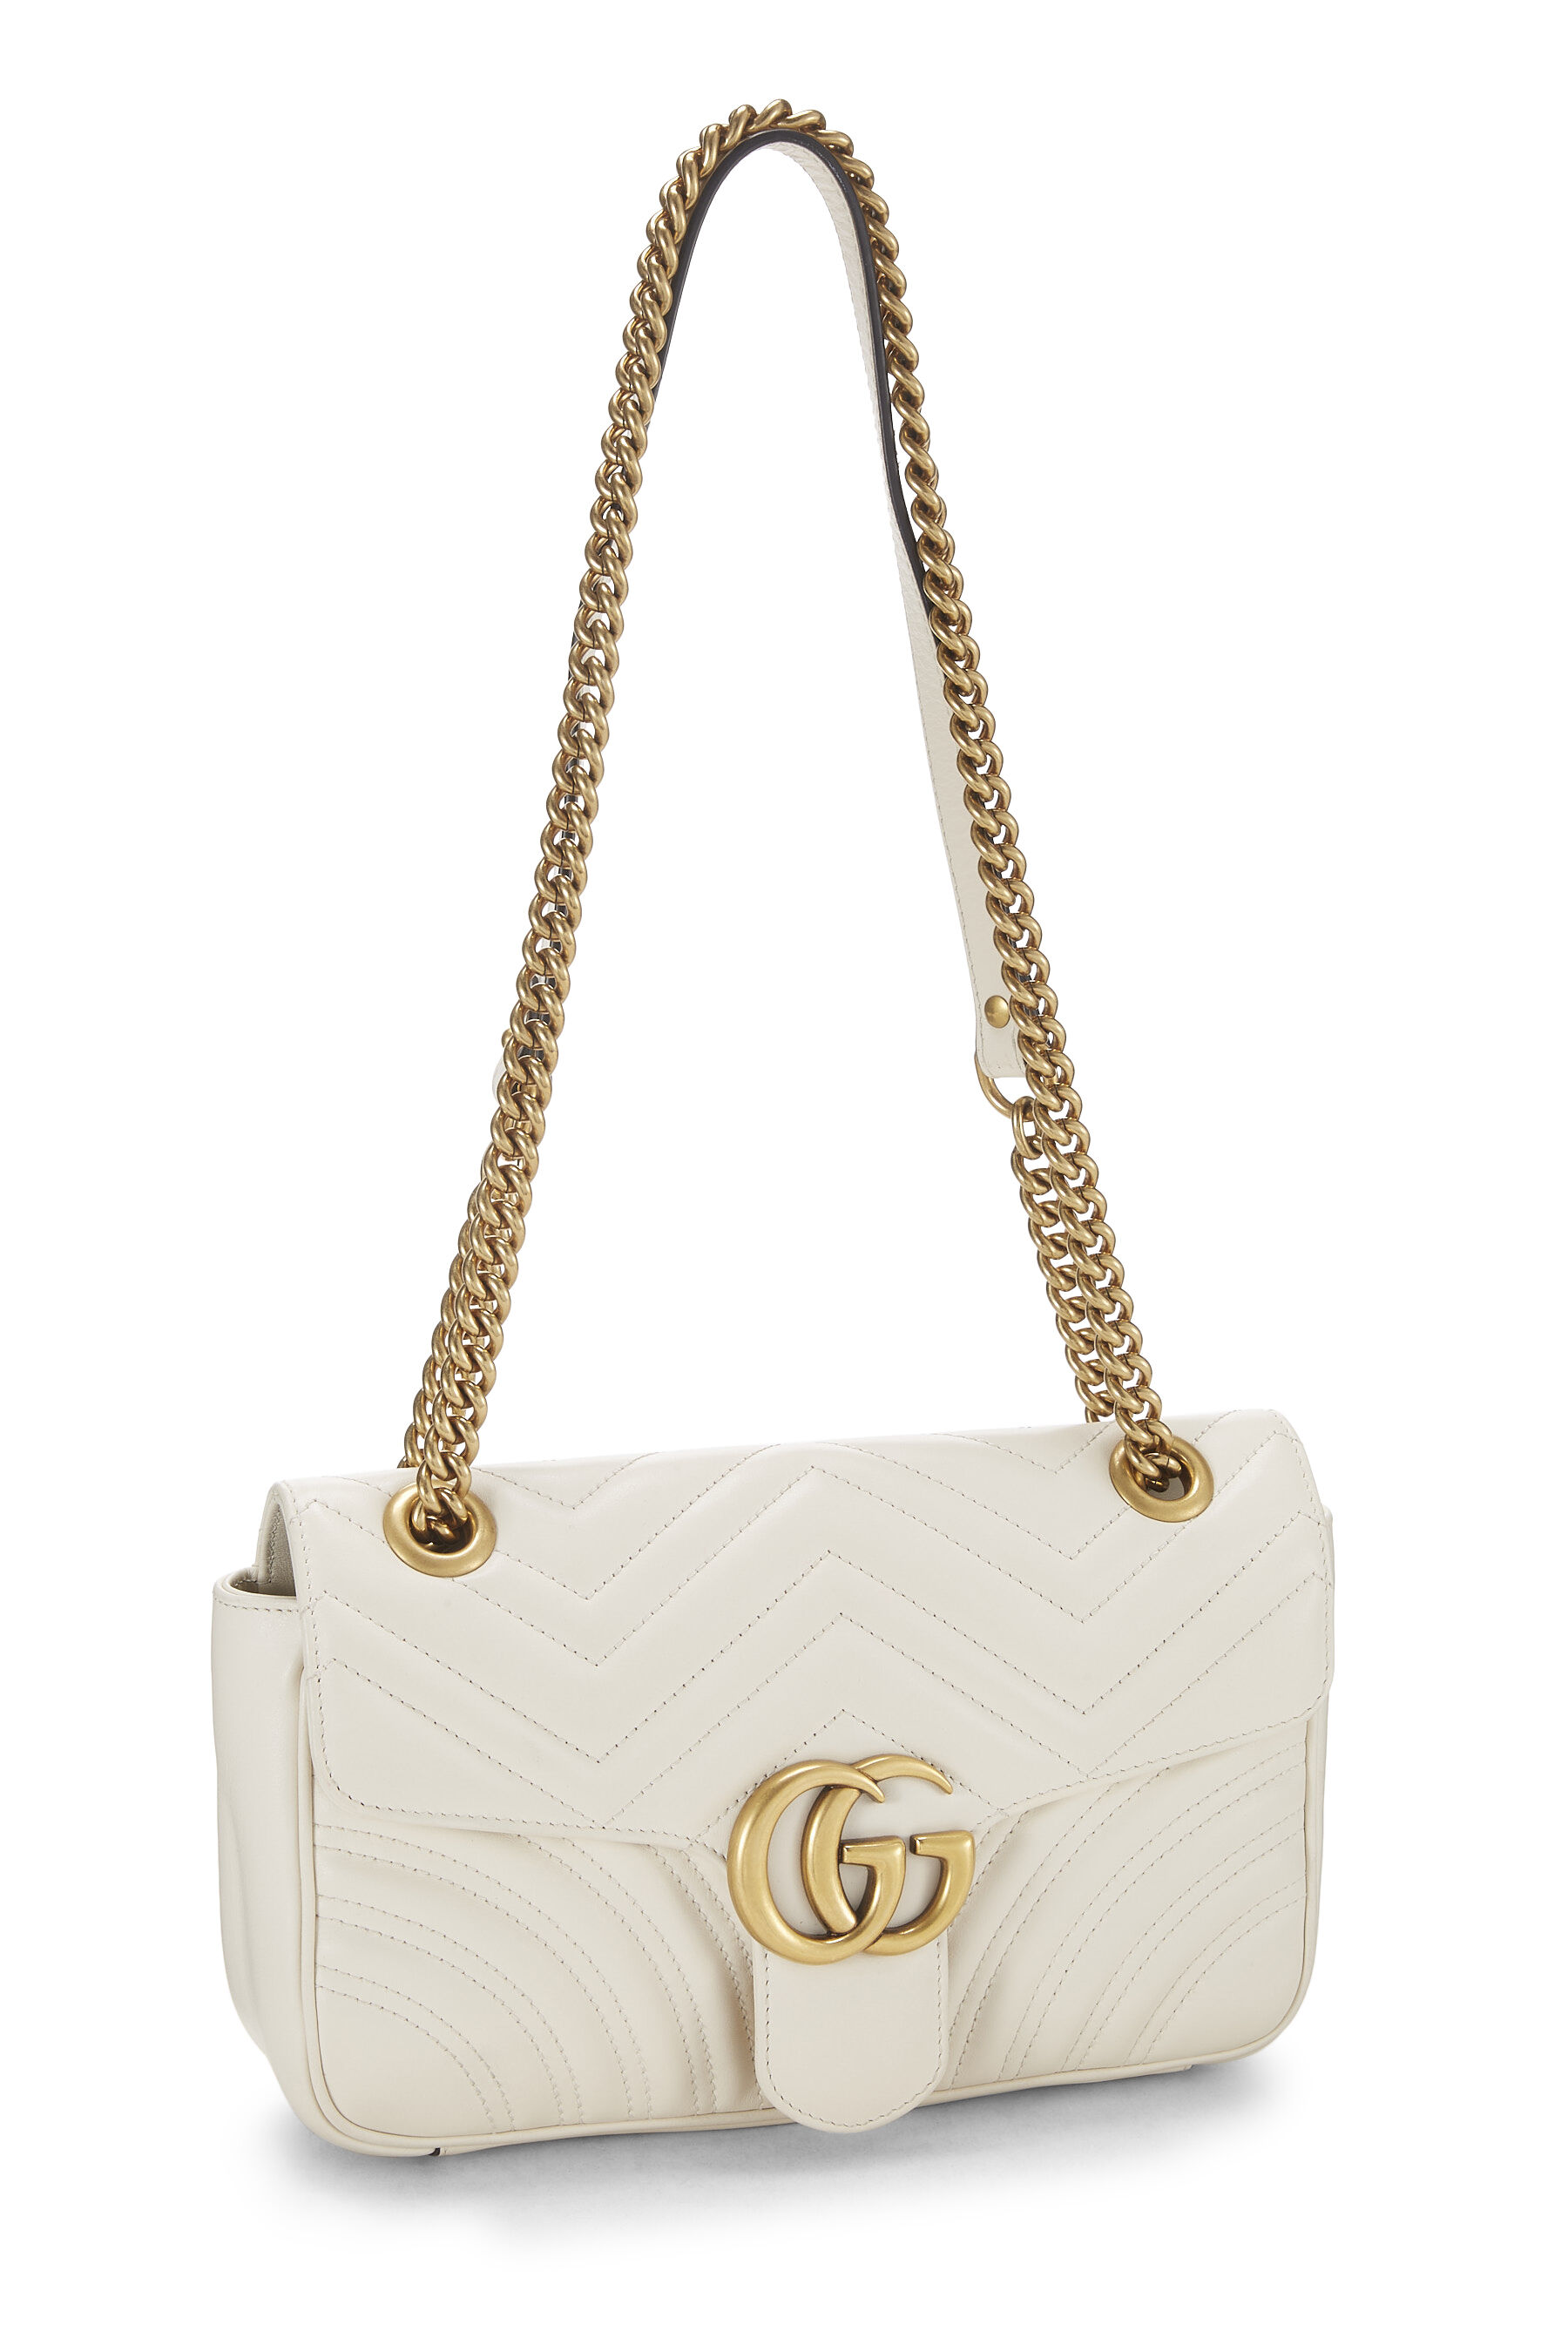 White Leather GG Marmont Shoulder Bag Small